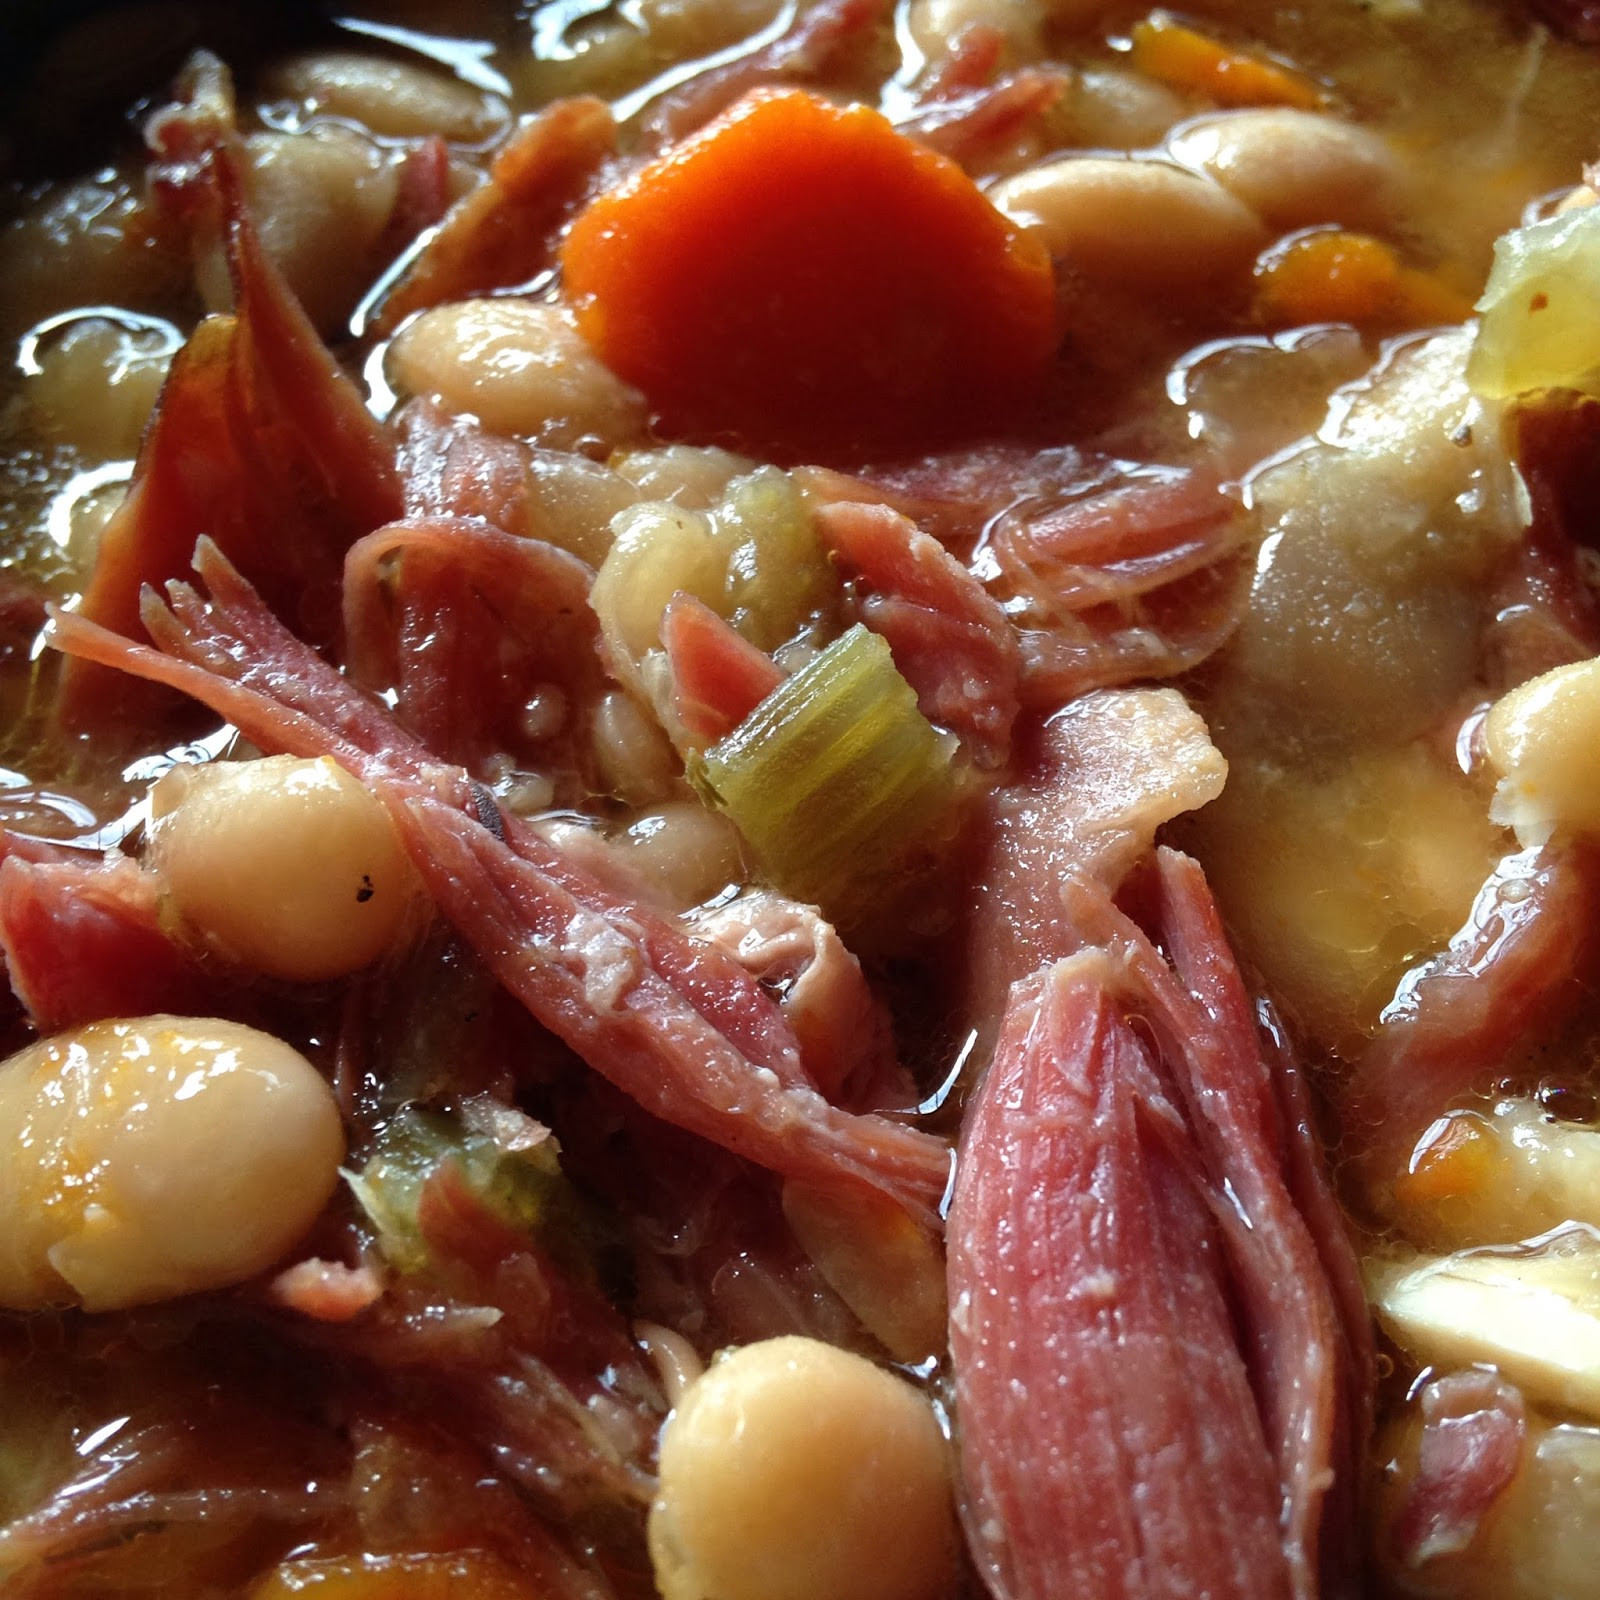 Ham Hock Recipes Slow Cooker
 Turnips 2 Tangerines Slow Cooker White Beans with Smoked